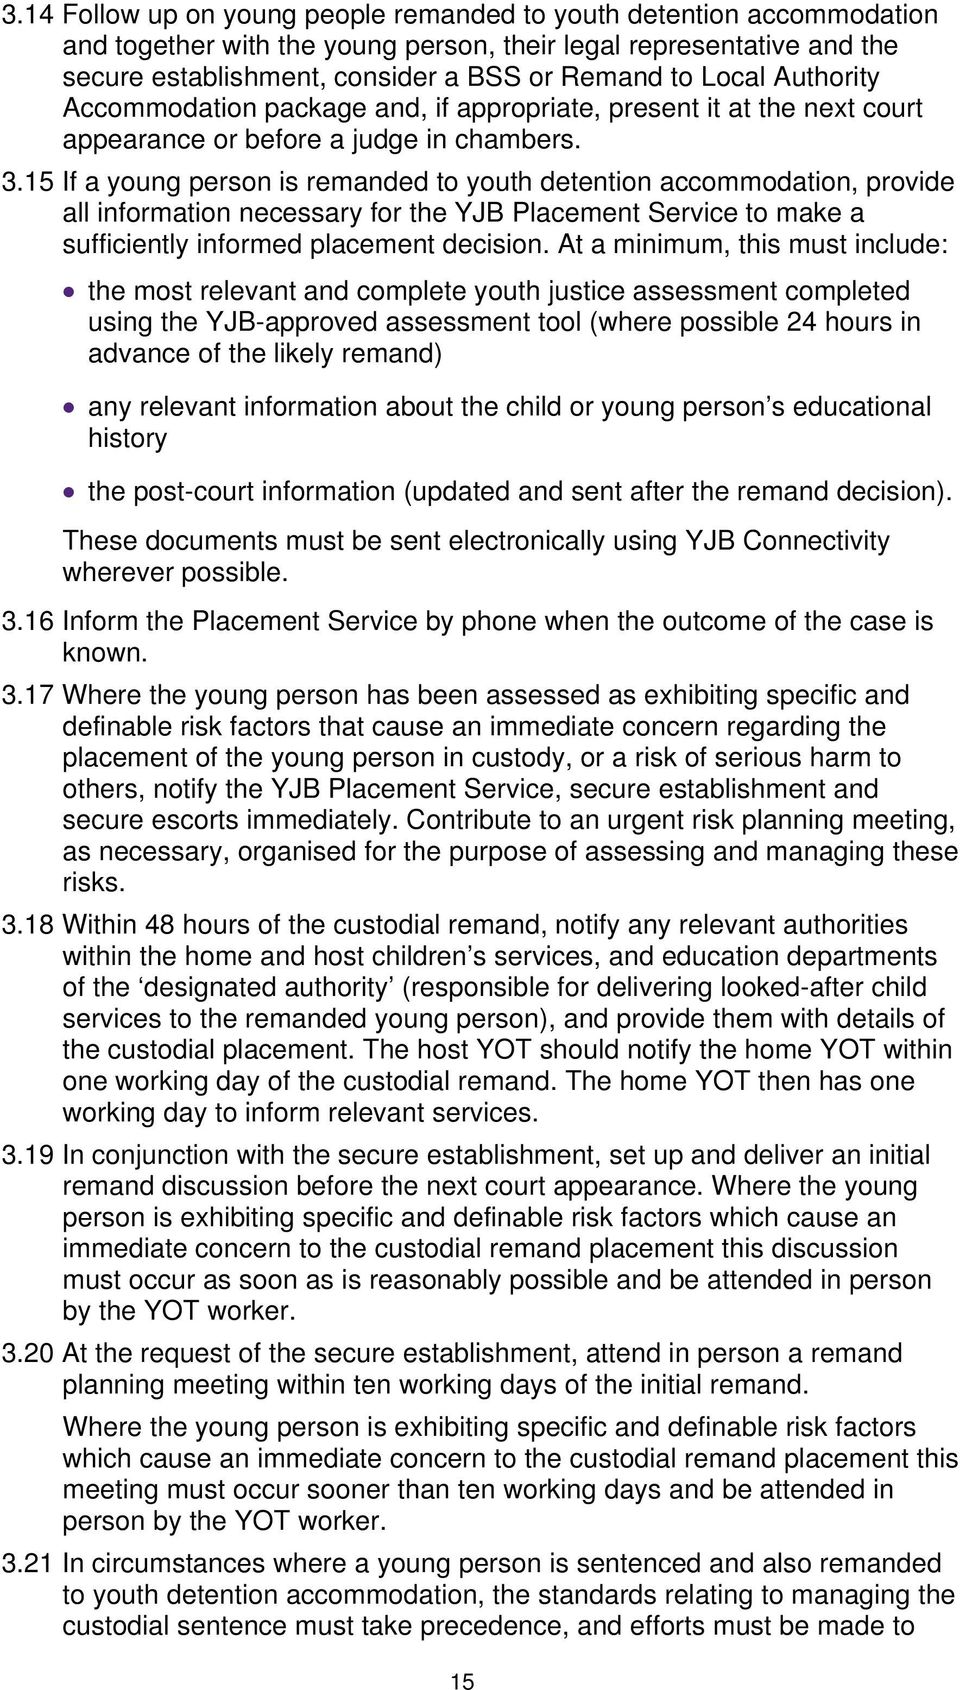 15 If a young person is remanded to youth detention accommodation, provide all information necessary for the YJB Placement Service to make a sufficiently informed placement decision.